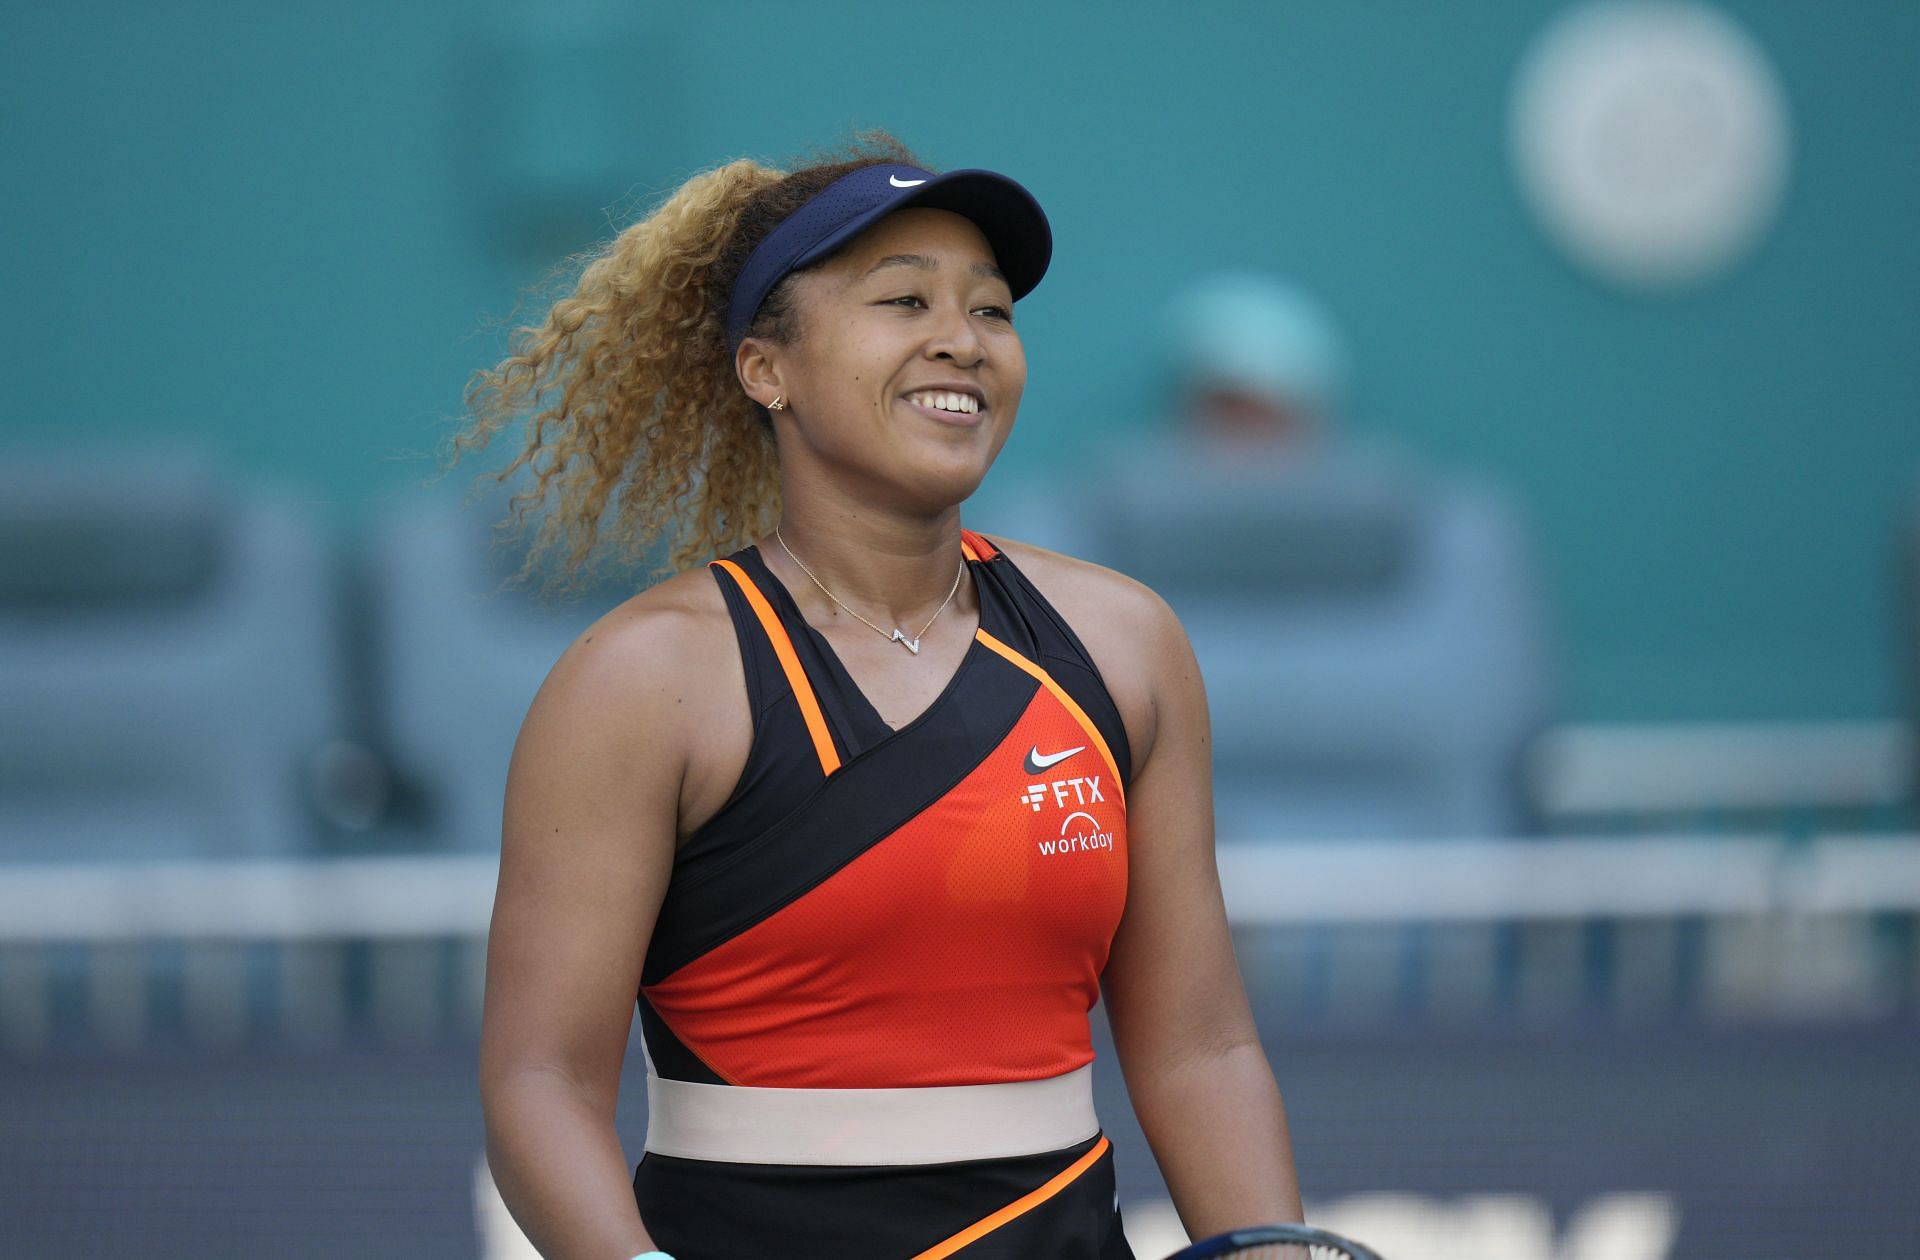 Osaka has reached the semifinals of the Miami Open for the first time in her career